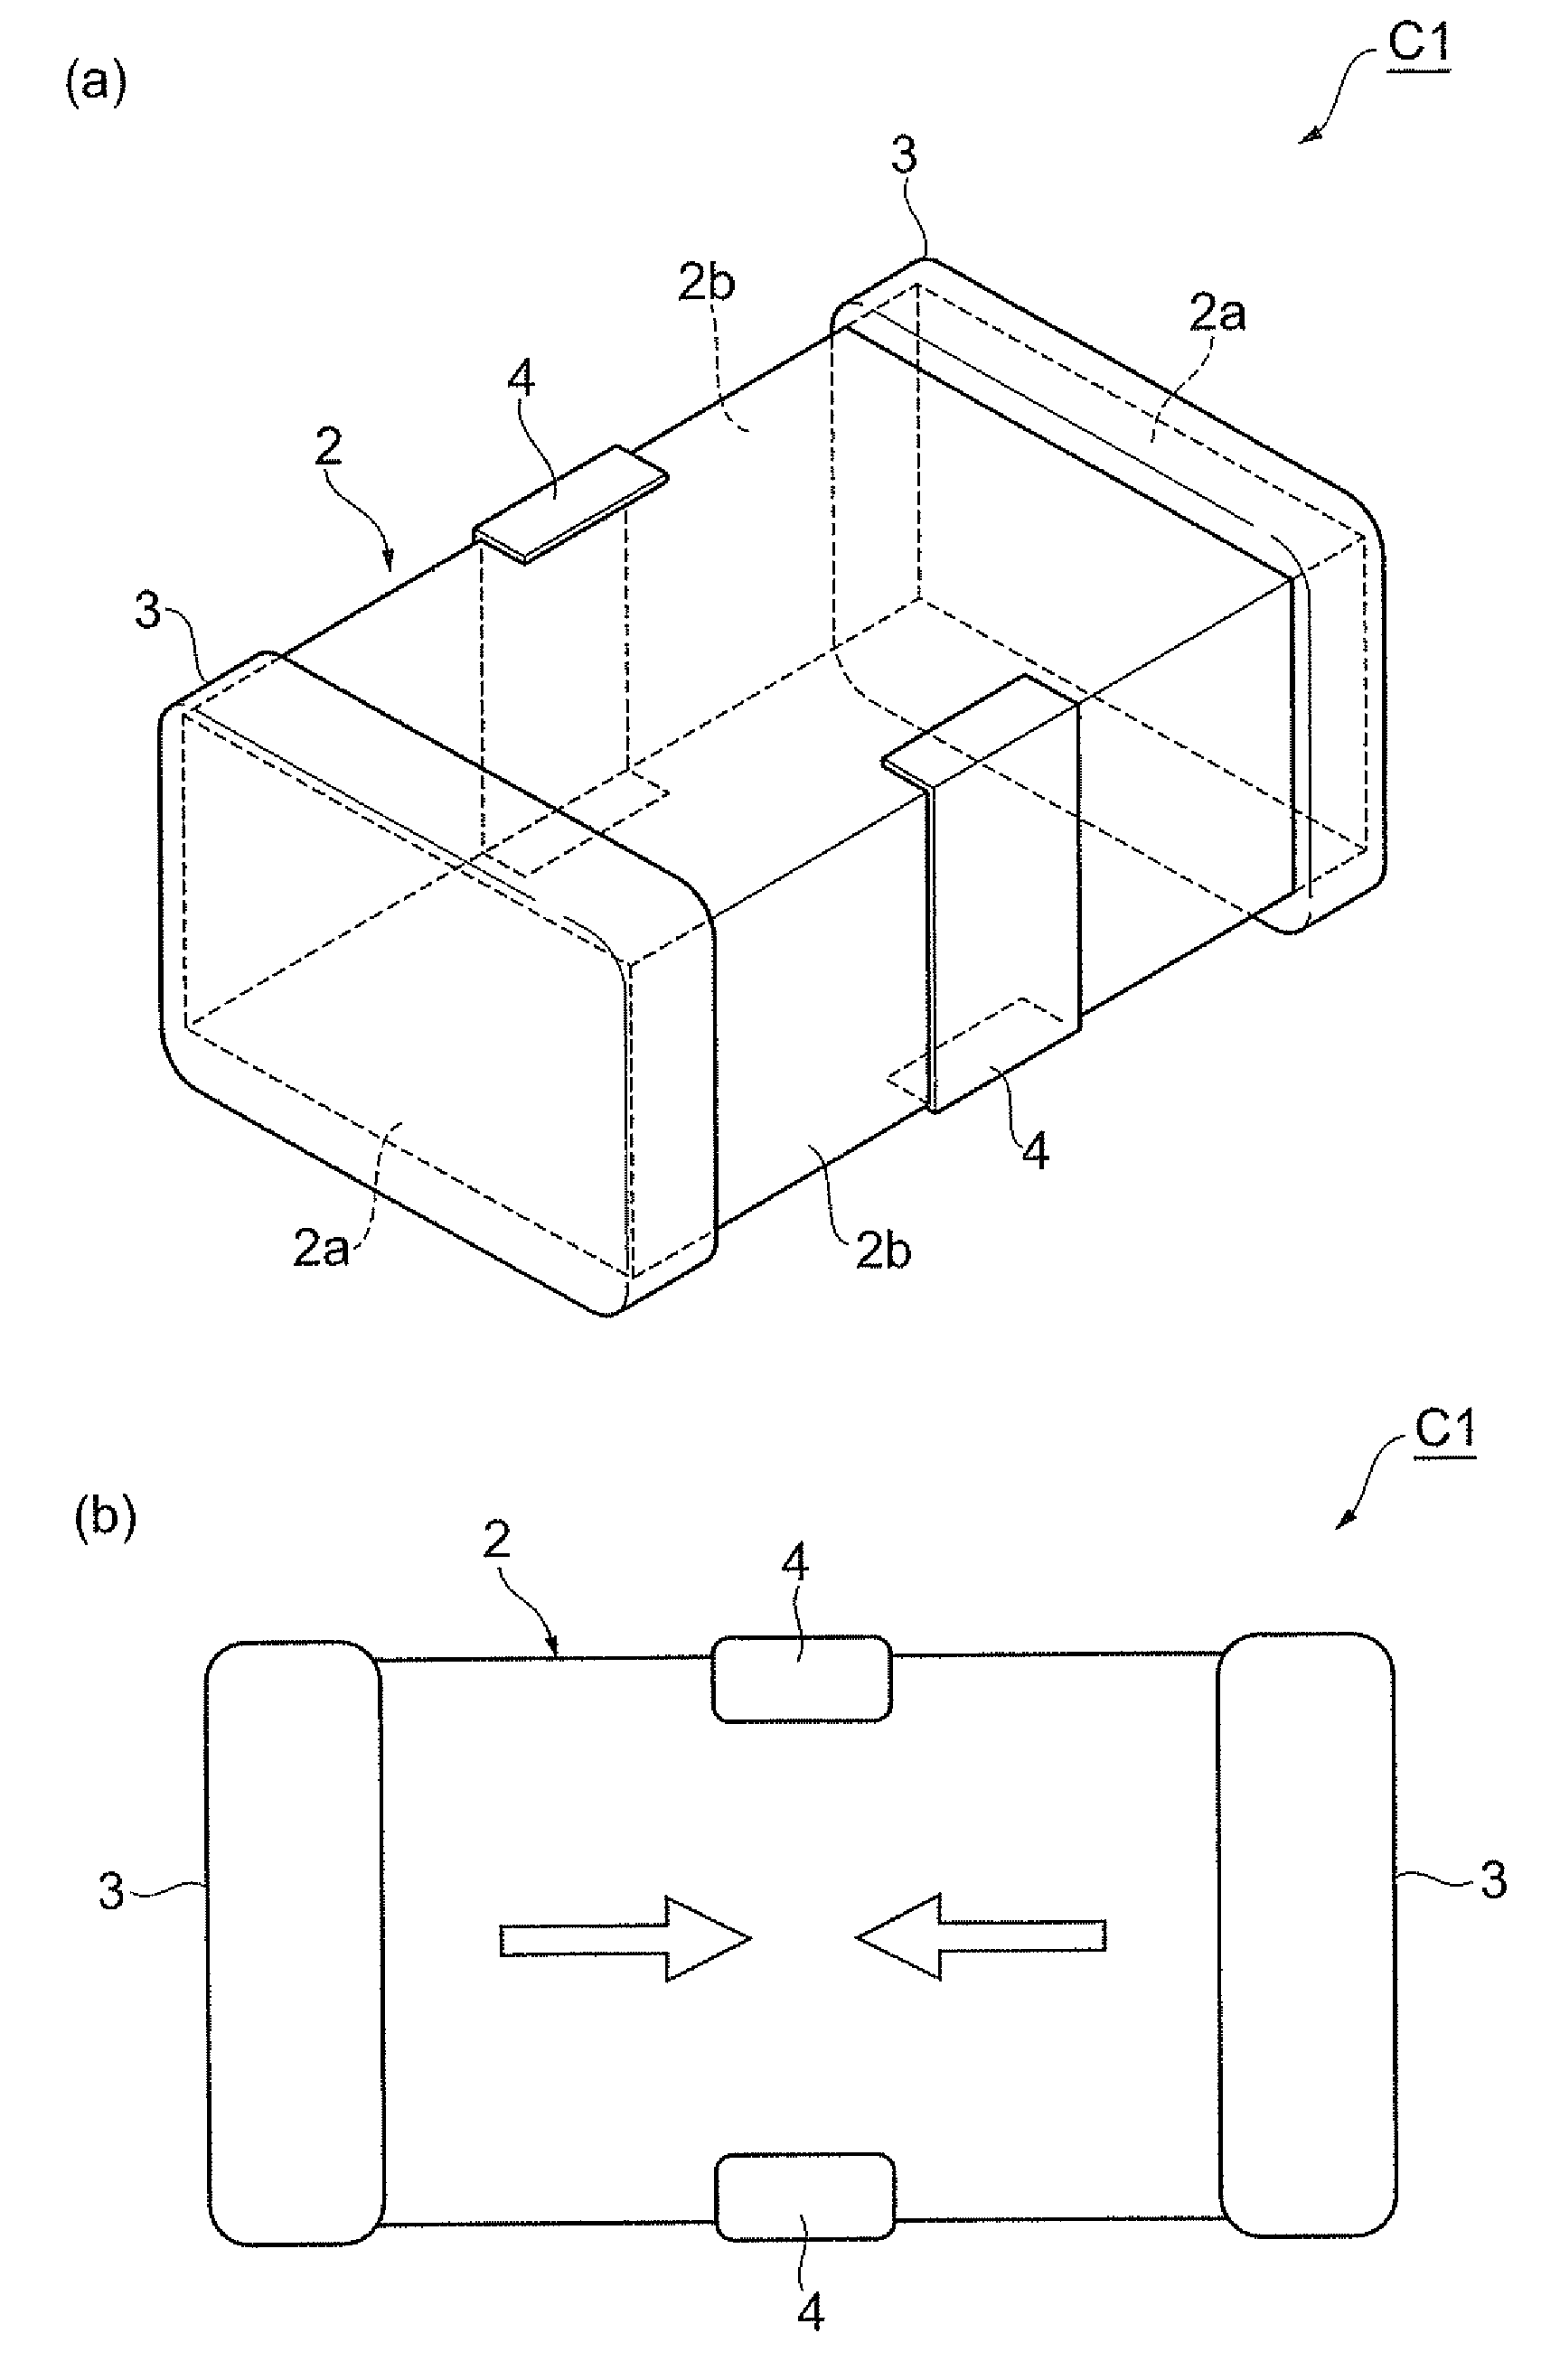 Feedthrough capacitor mounted structure